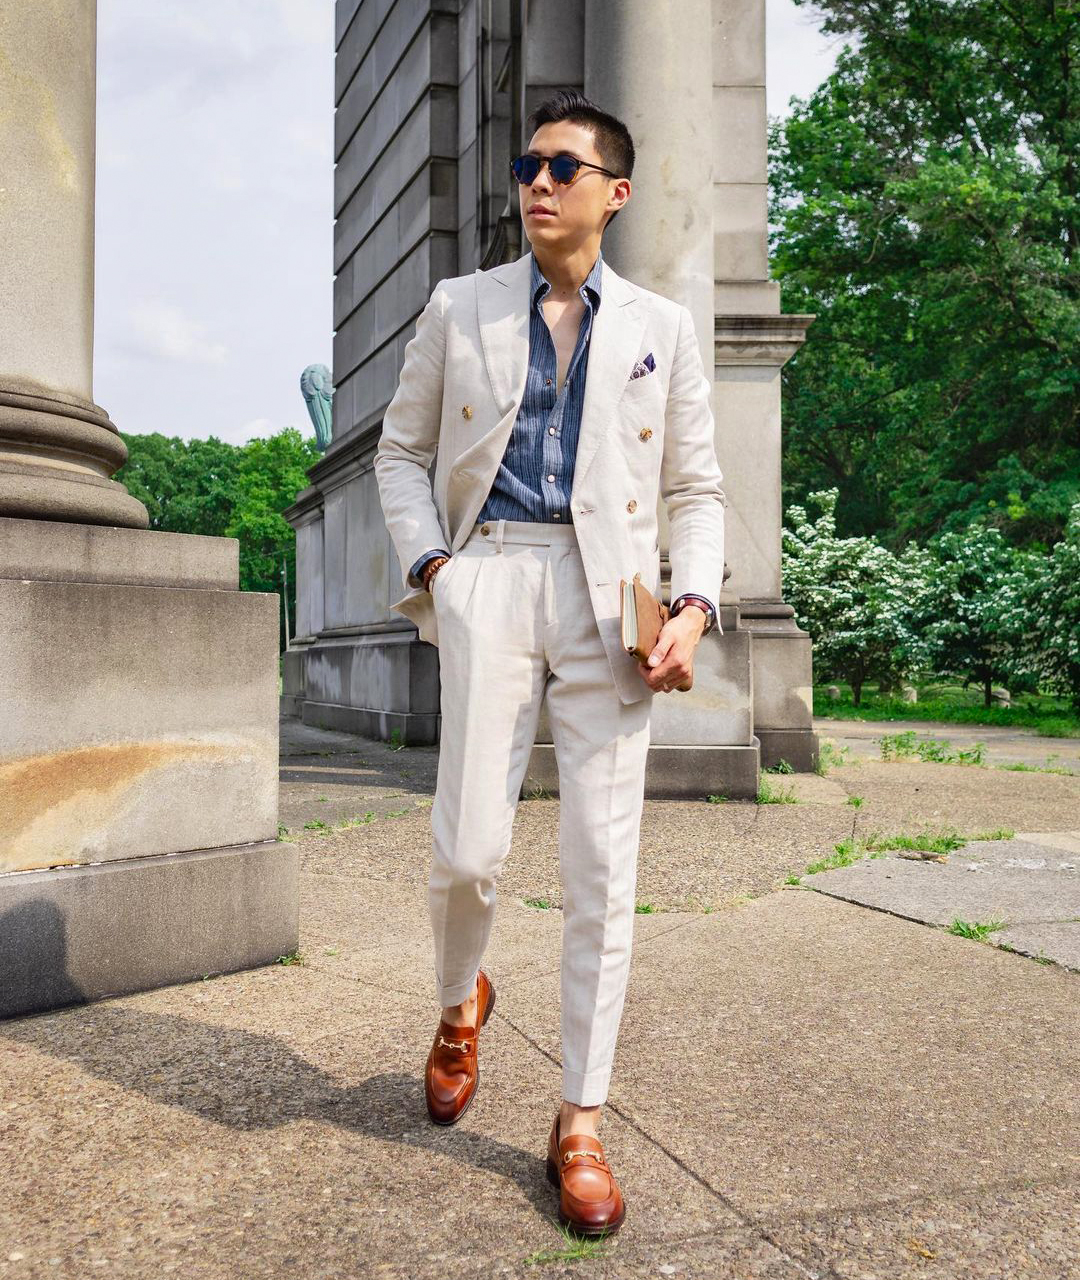 Ekspert Ung linse Stylish & Simple Ways to Wear Loafers with a Suit - Suits Expert